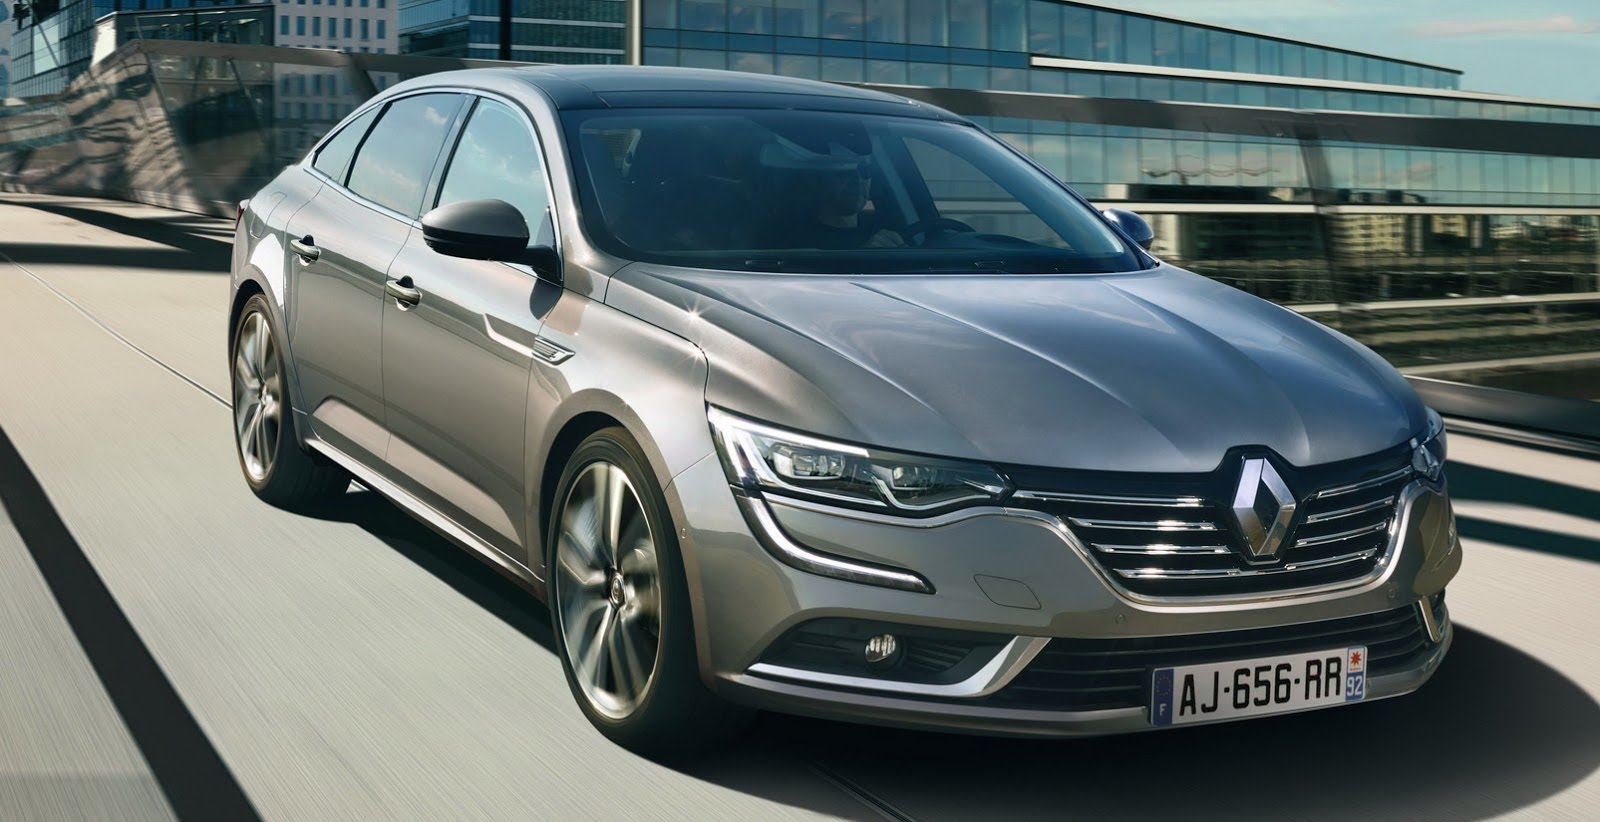 The Renault Talisman - Most Beautiful Car of the Year